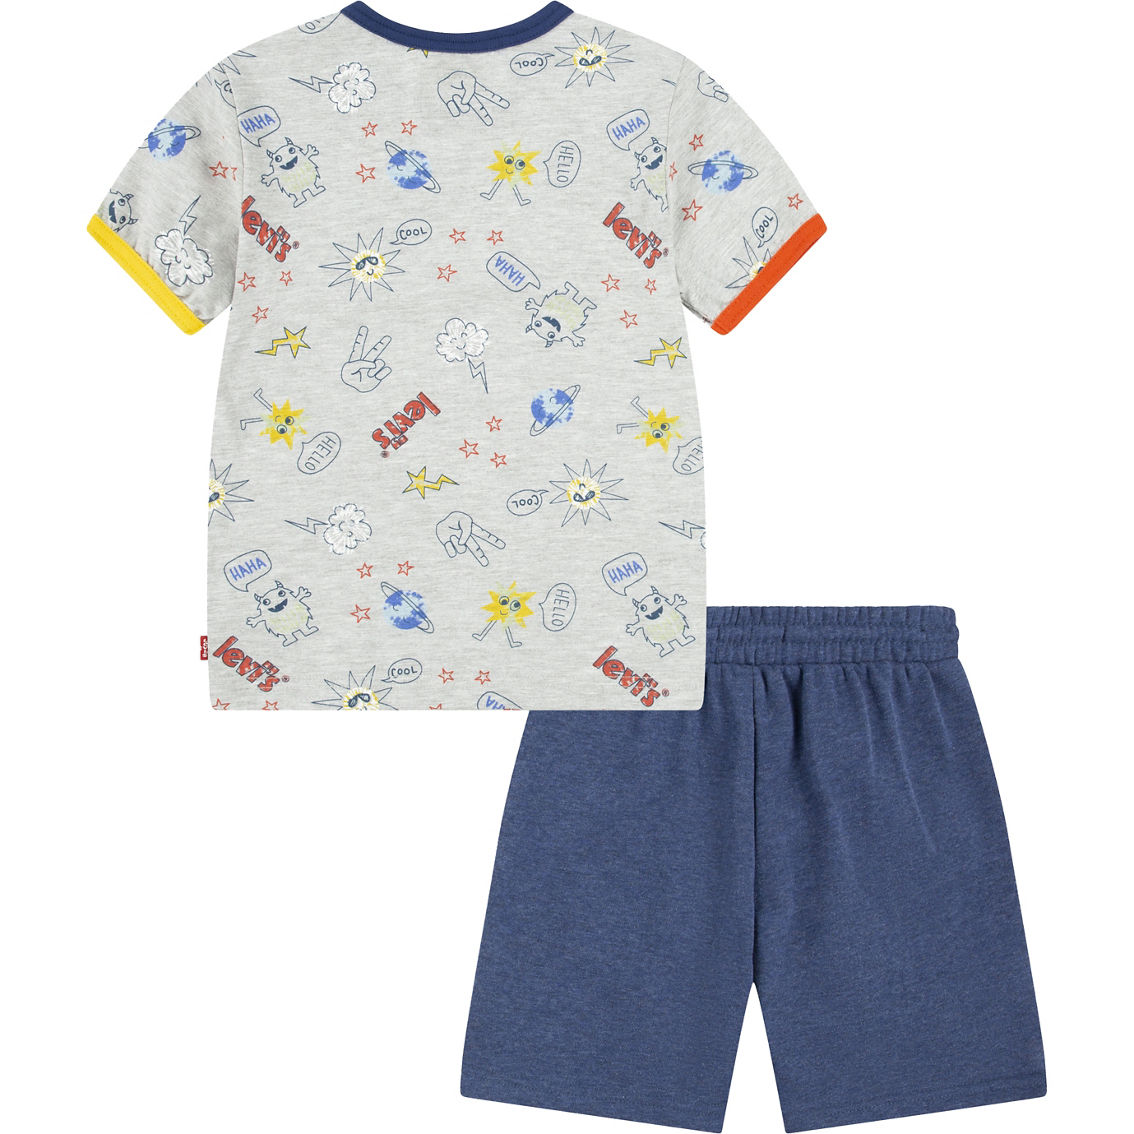 Levi's Little Boys Monster Doodle Tee and Shorts 2 pc. Set - Image 2 of 3